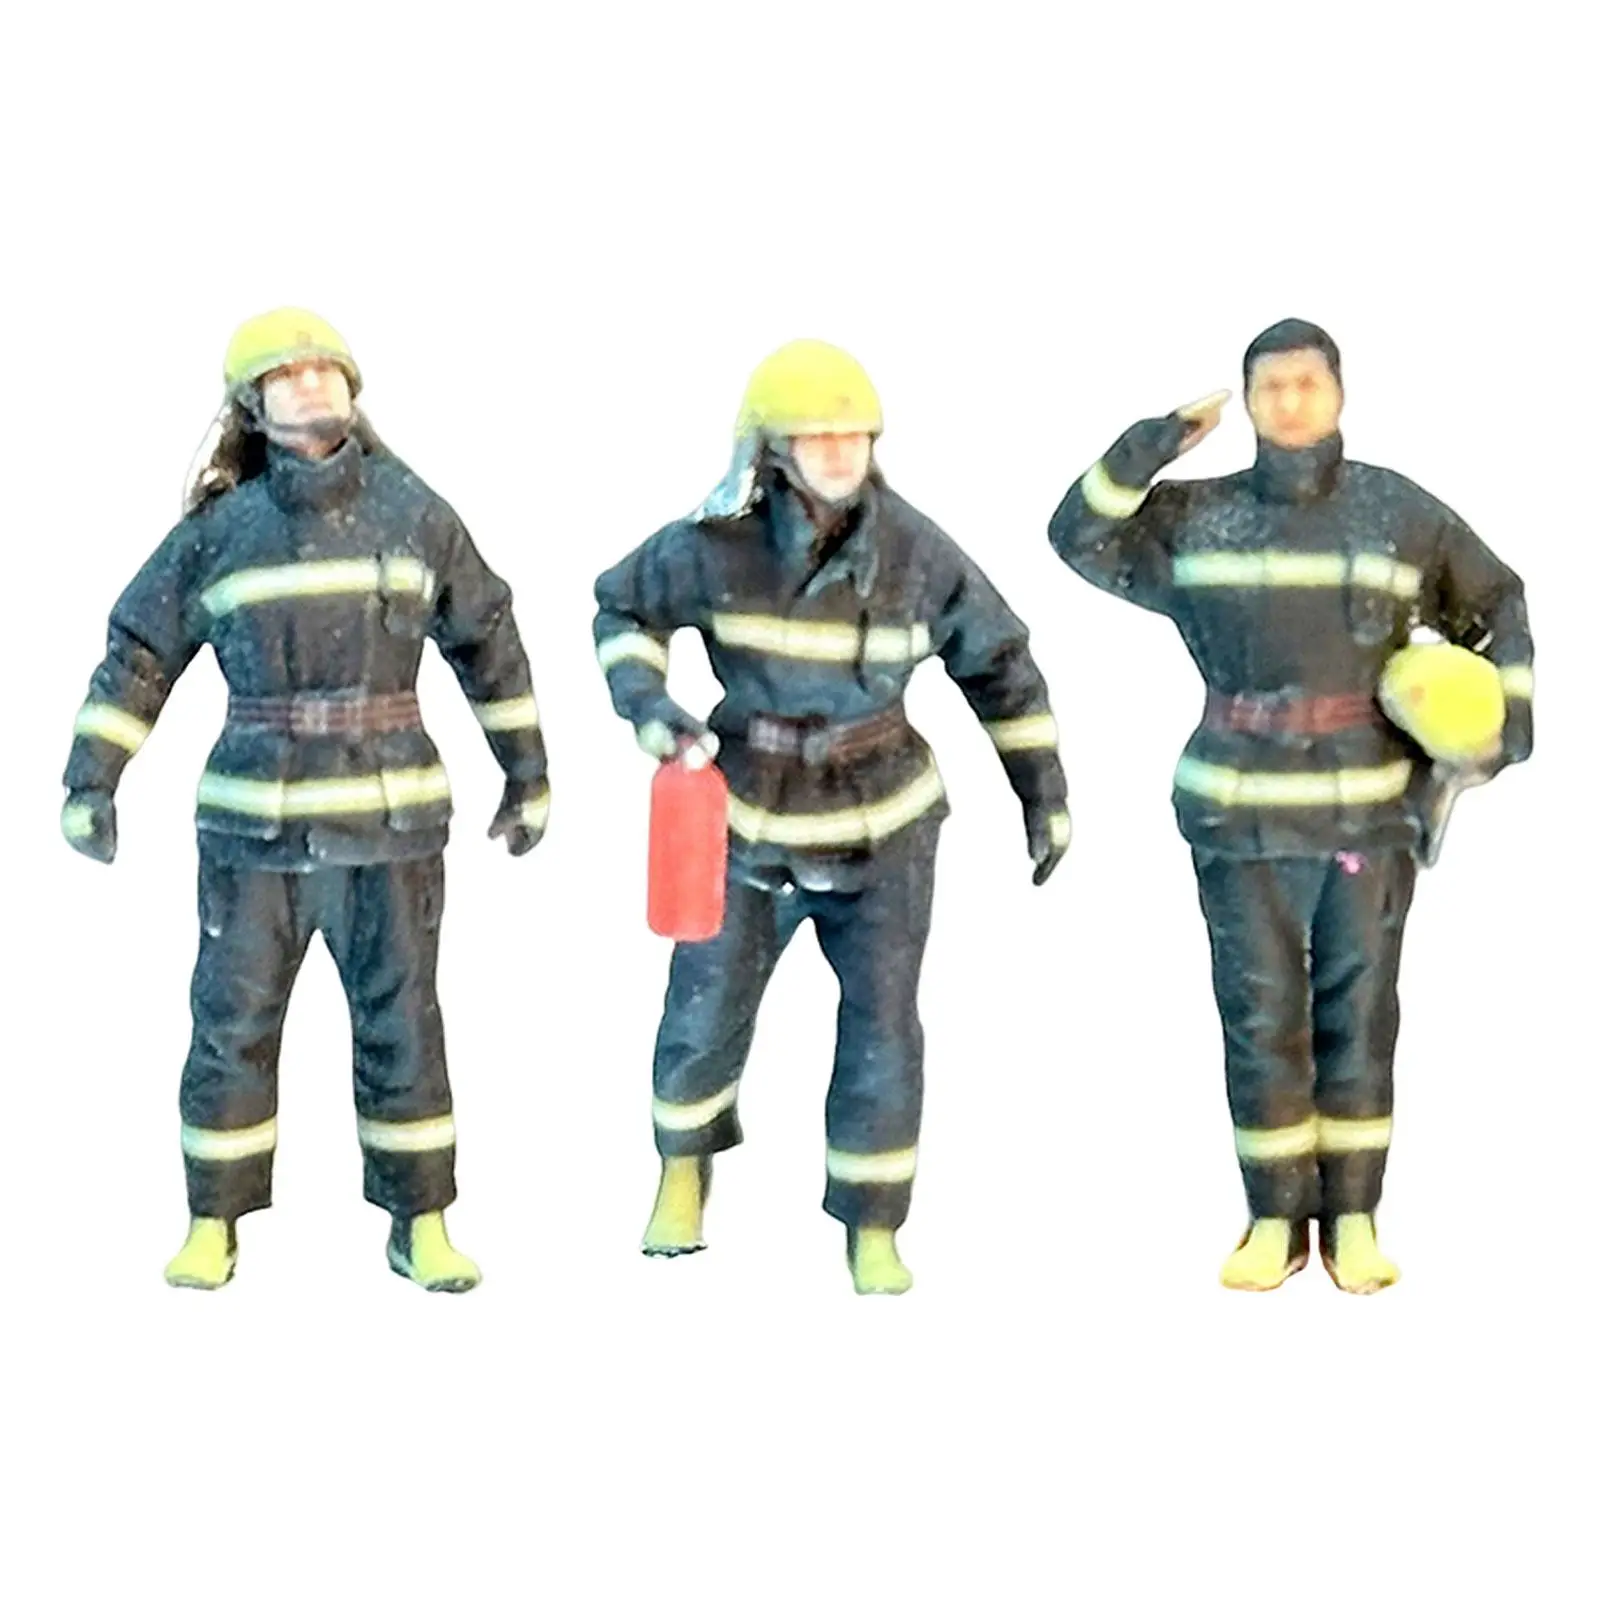 1/64 Resin Firefighter Figures Hand Painted Architecture Model Sand Table Ornament for Diorama Micro Landscapes Building Layout